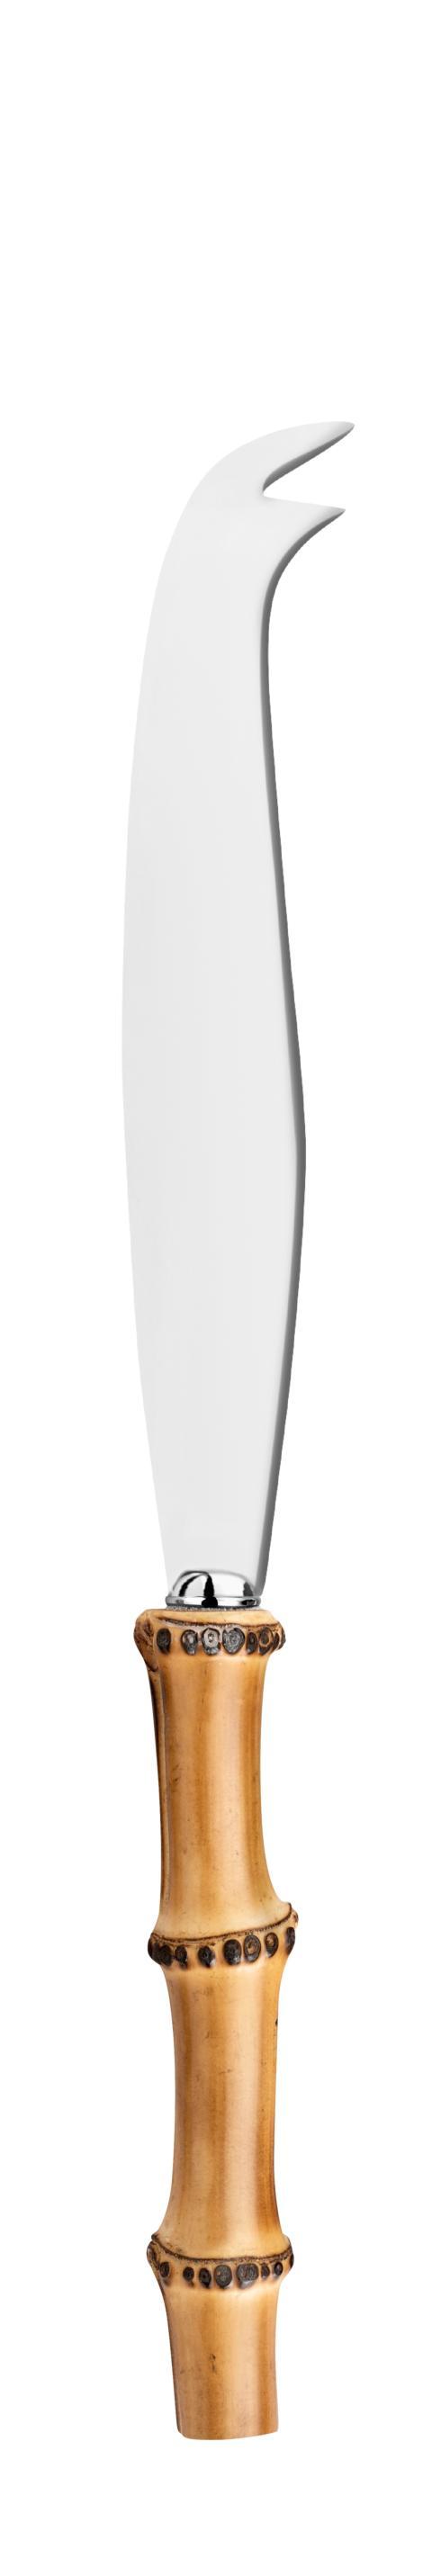 $68.00 Cheese knife large